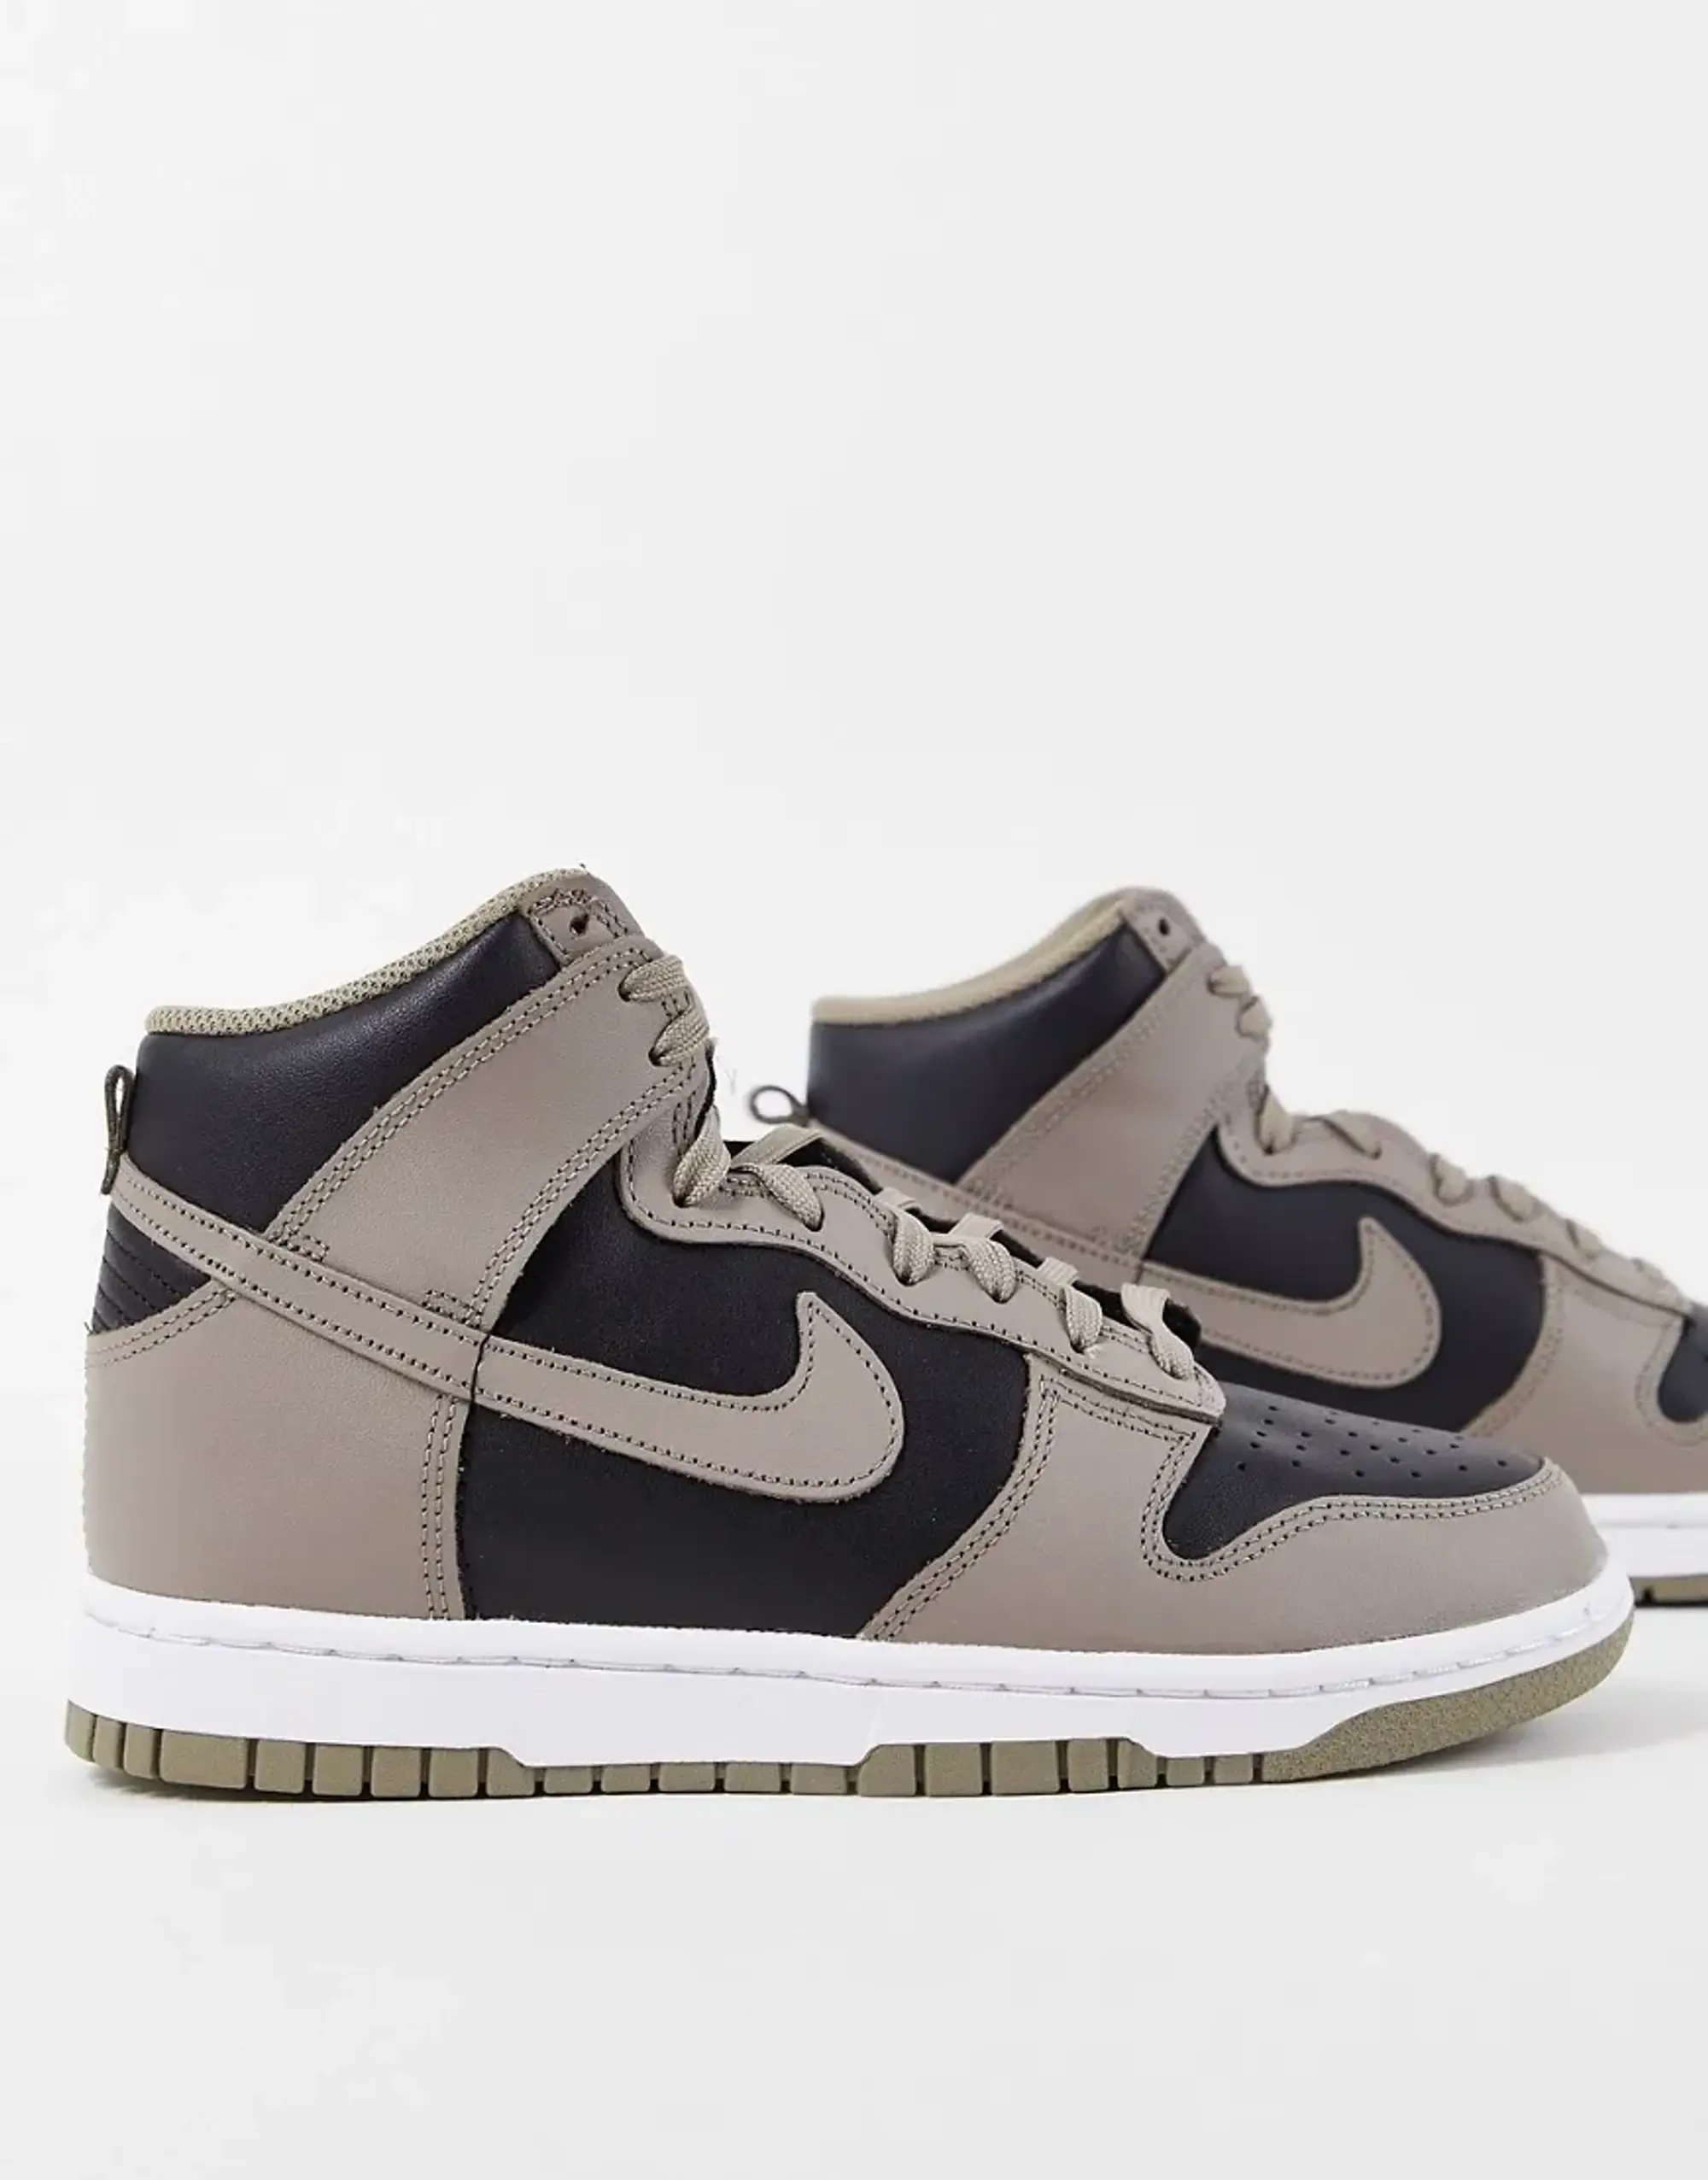 Nike Dunk High Trainers In Black And Fossil Grey